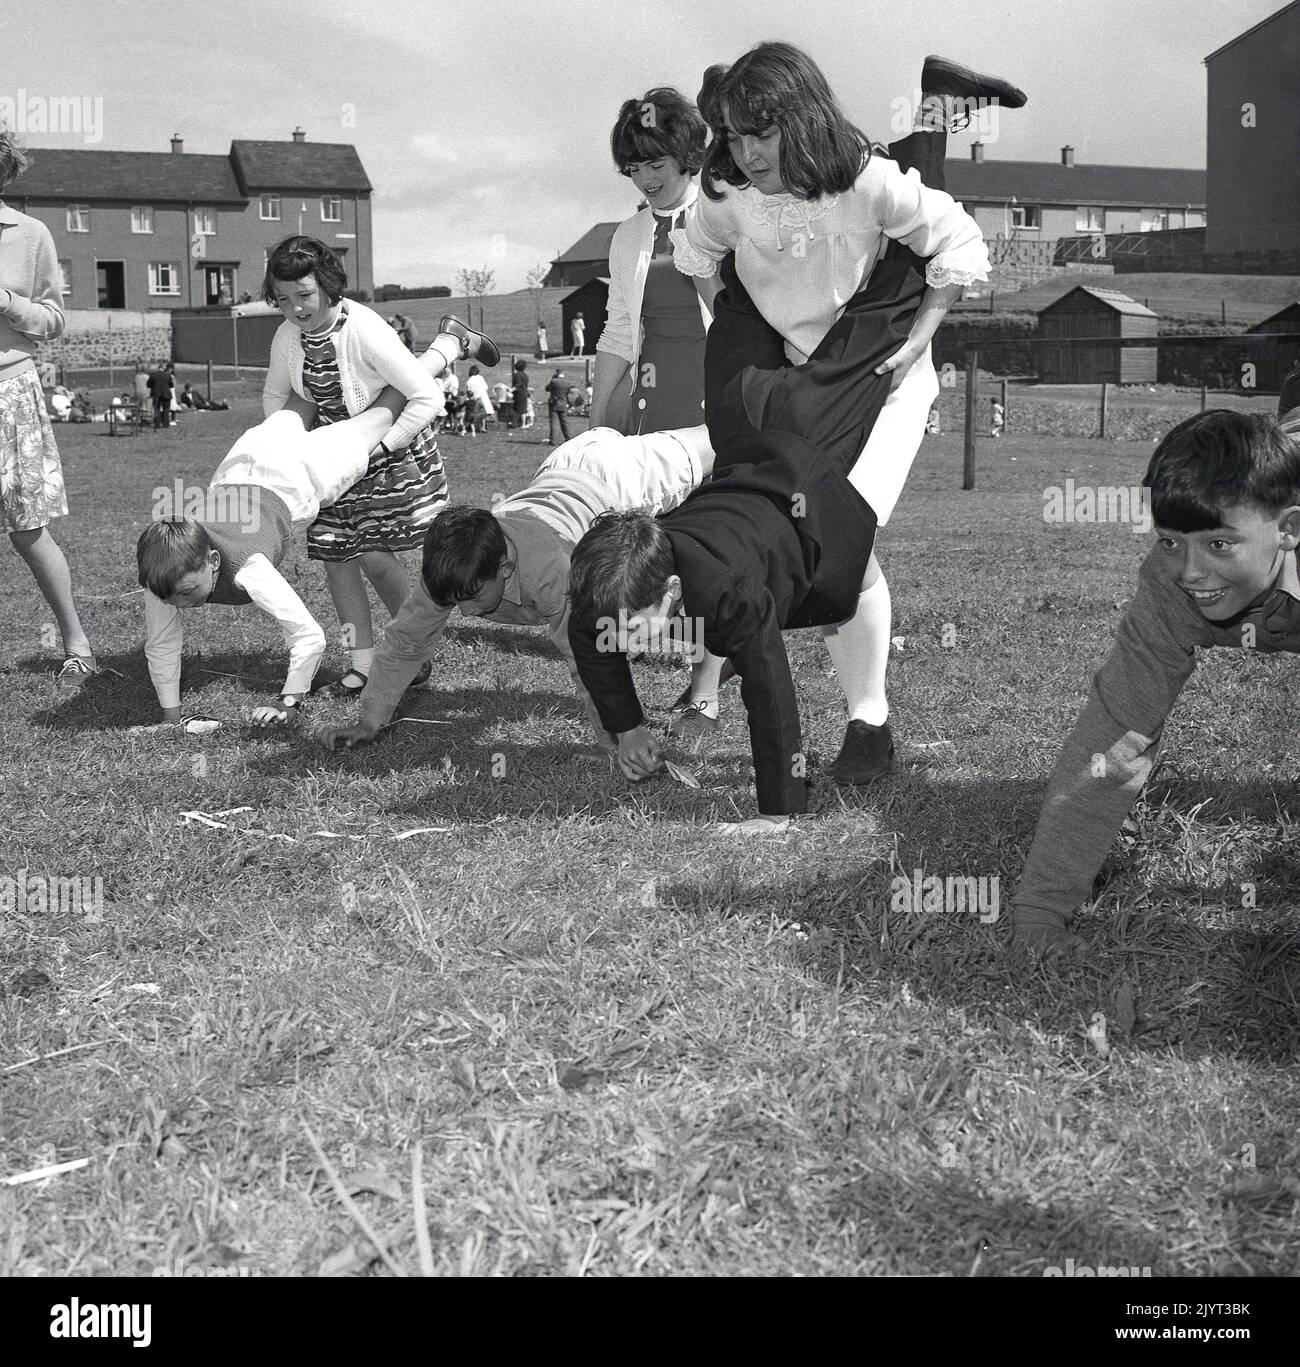 1965, historical, north queensferry gala day, youngsters taking part in a wheel-barrow race outside on the grass in a field of a housing estate at North Queensferry, Fife, Scotland, UK, the girls holding the boys legs! Stock Photo